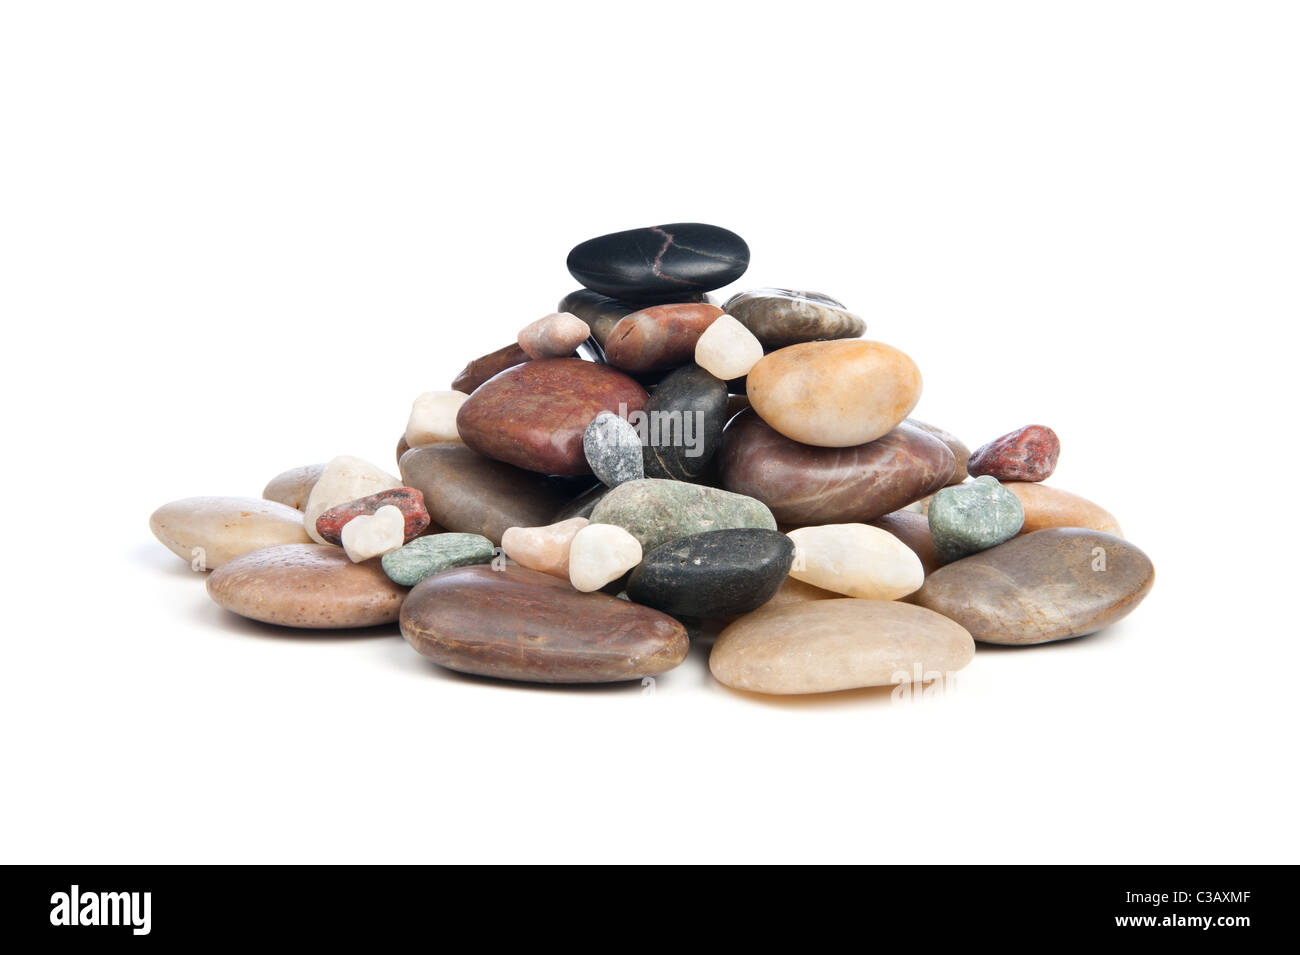 A pile of smooth, shiny river rocks on a white background. Stock Photo